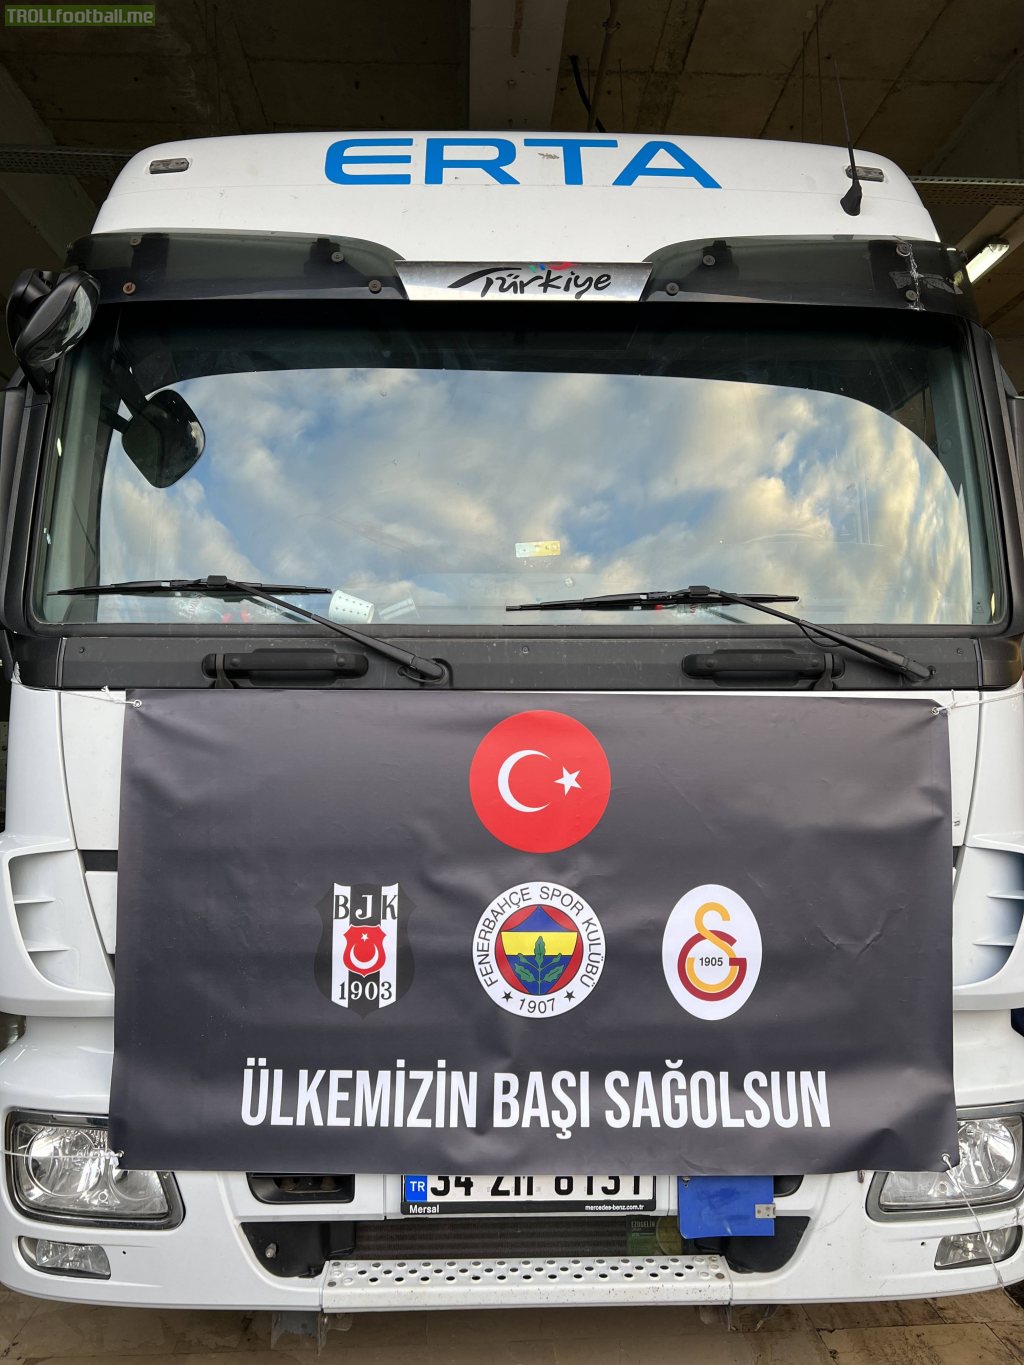 Beşiktaş, Fenerbahçe and Galatasaray sent 3 trucks of supplies with three clubs logo's side by side to the region that hit by the earthquake